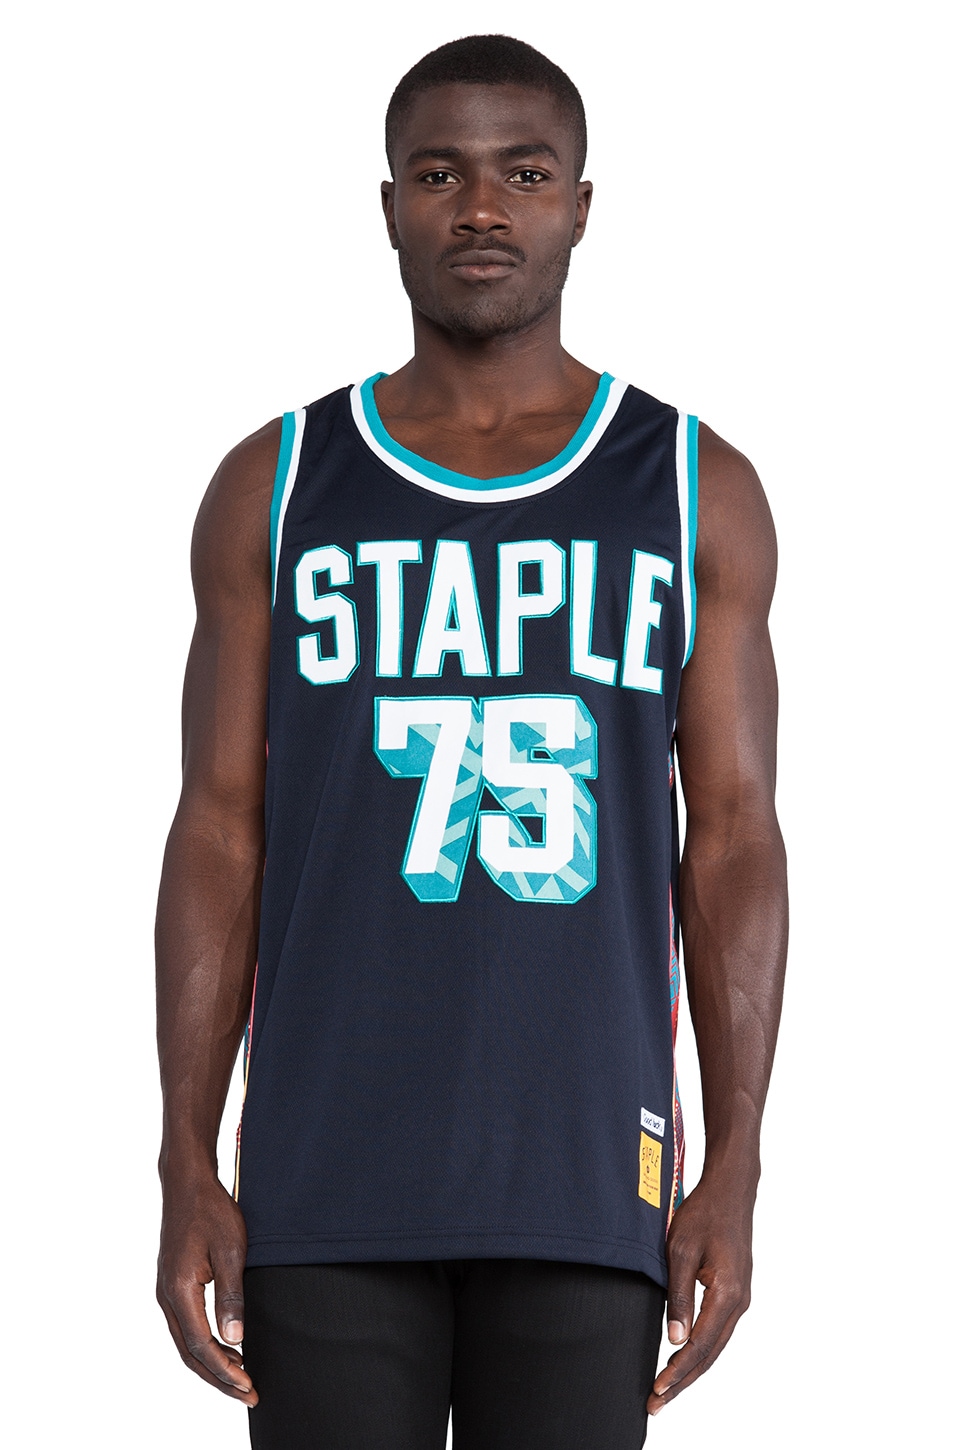 andrew wiggins jersey cheap